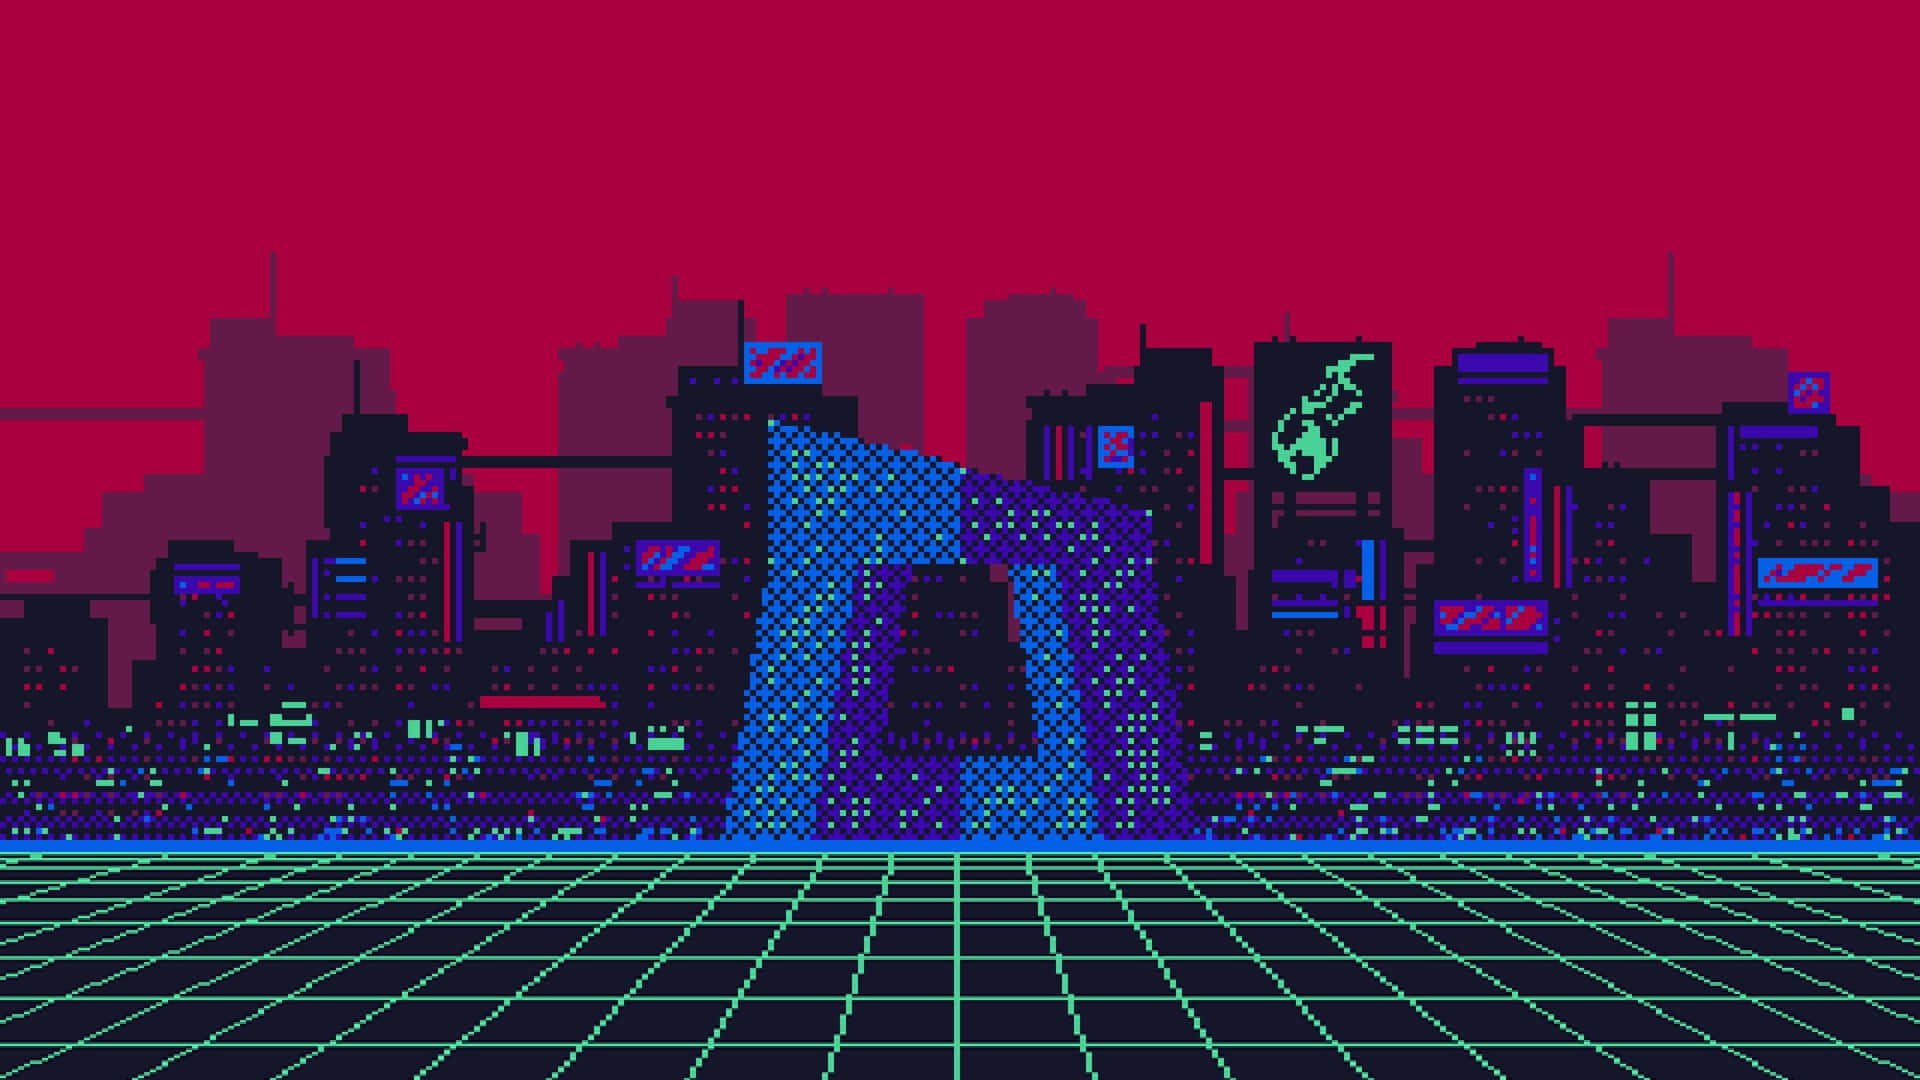 “welcome To The Future Of Cyberpunk Pixel Art” Background